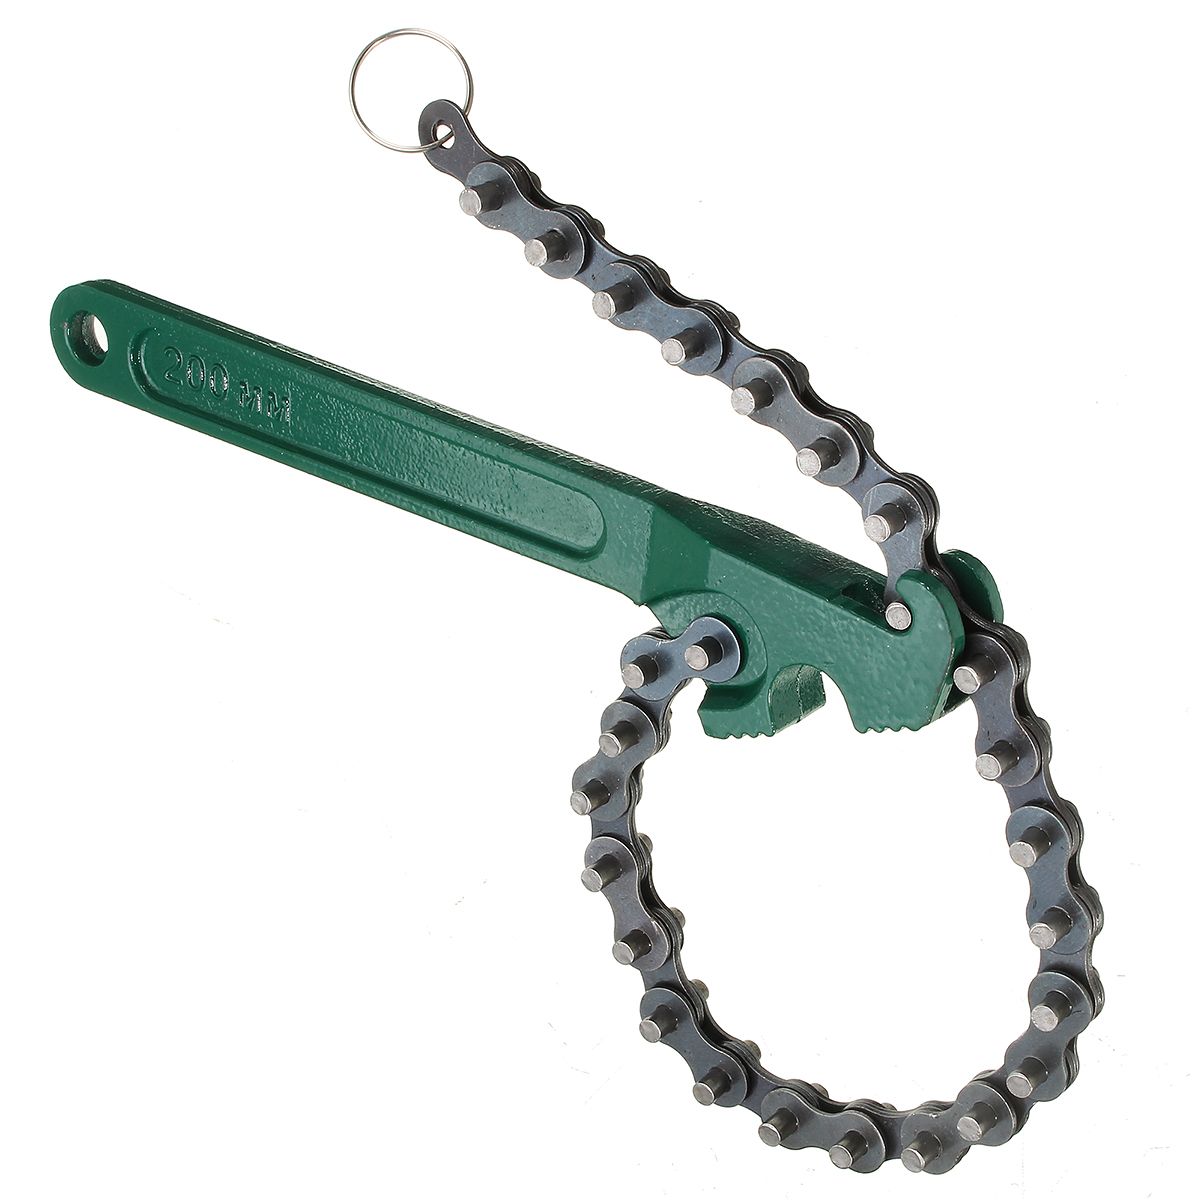 812-Inch-Chain-Type-Machine-DIY-Series-Oil-Grid-Filter-Wrench-Plier-Remove-Tool-1142781